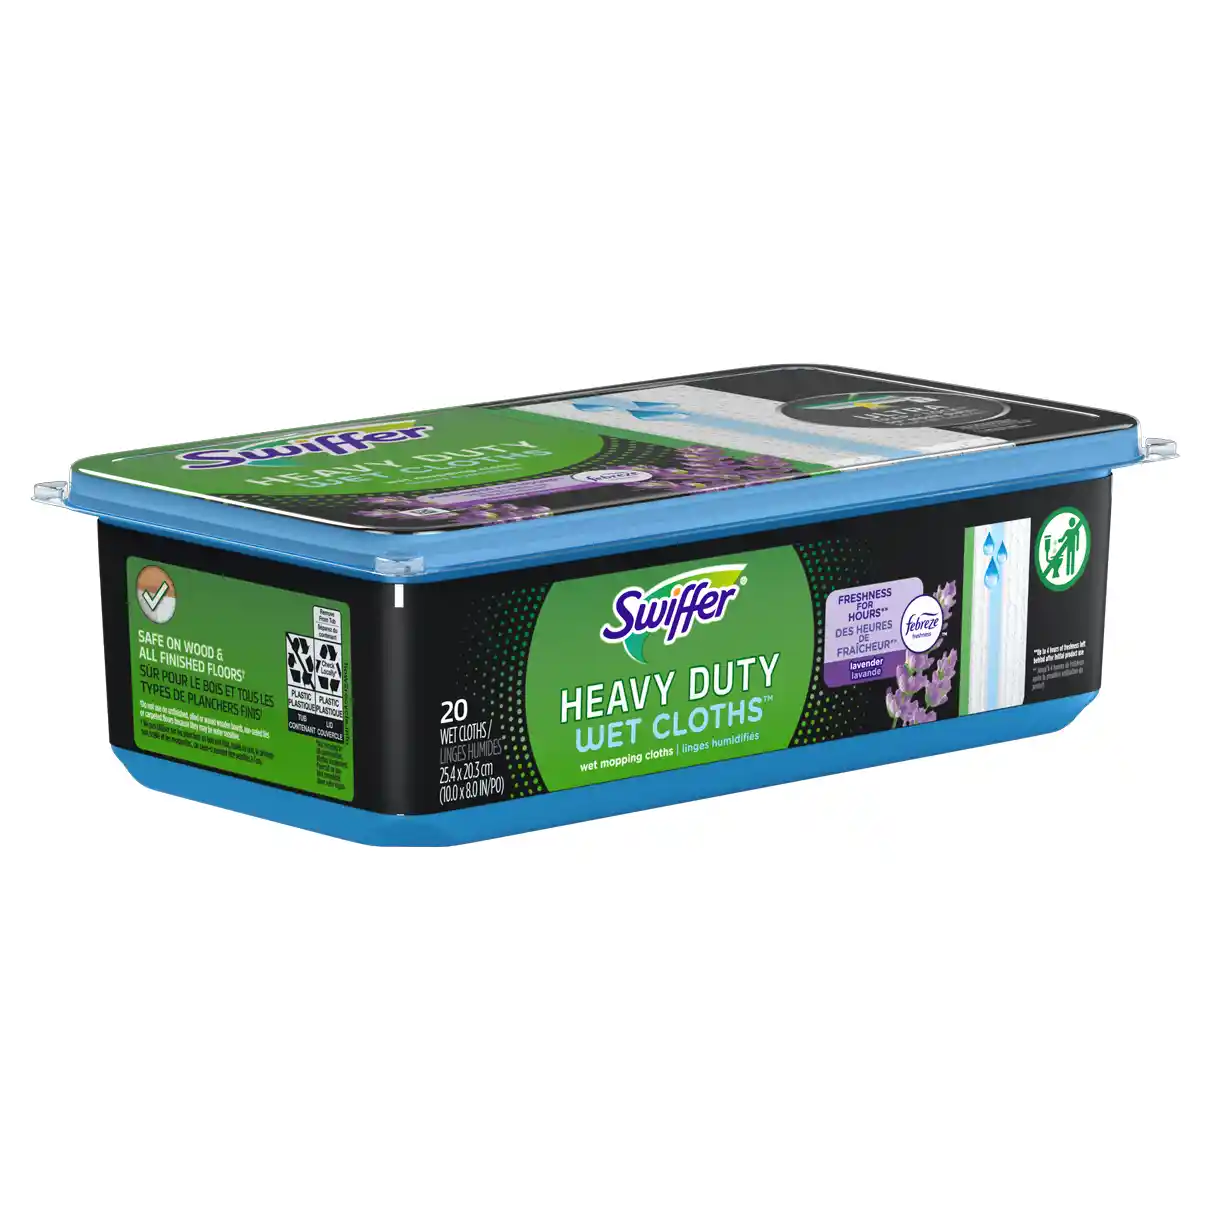 Swiffer Sweeper Heavy Duty Wet Pad Refills, Lavender Scent, 20 Ct 